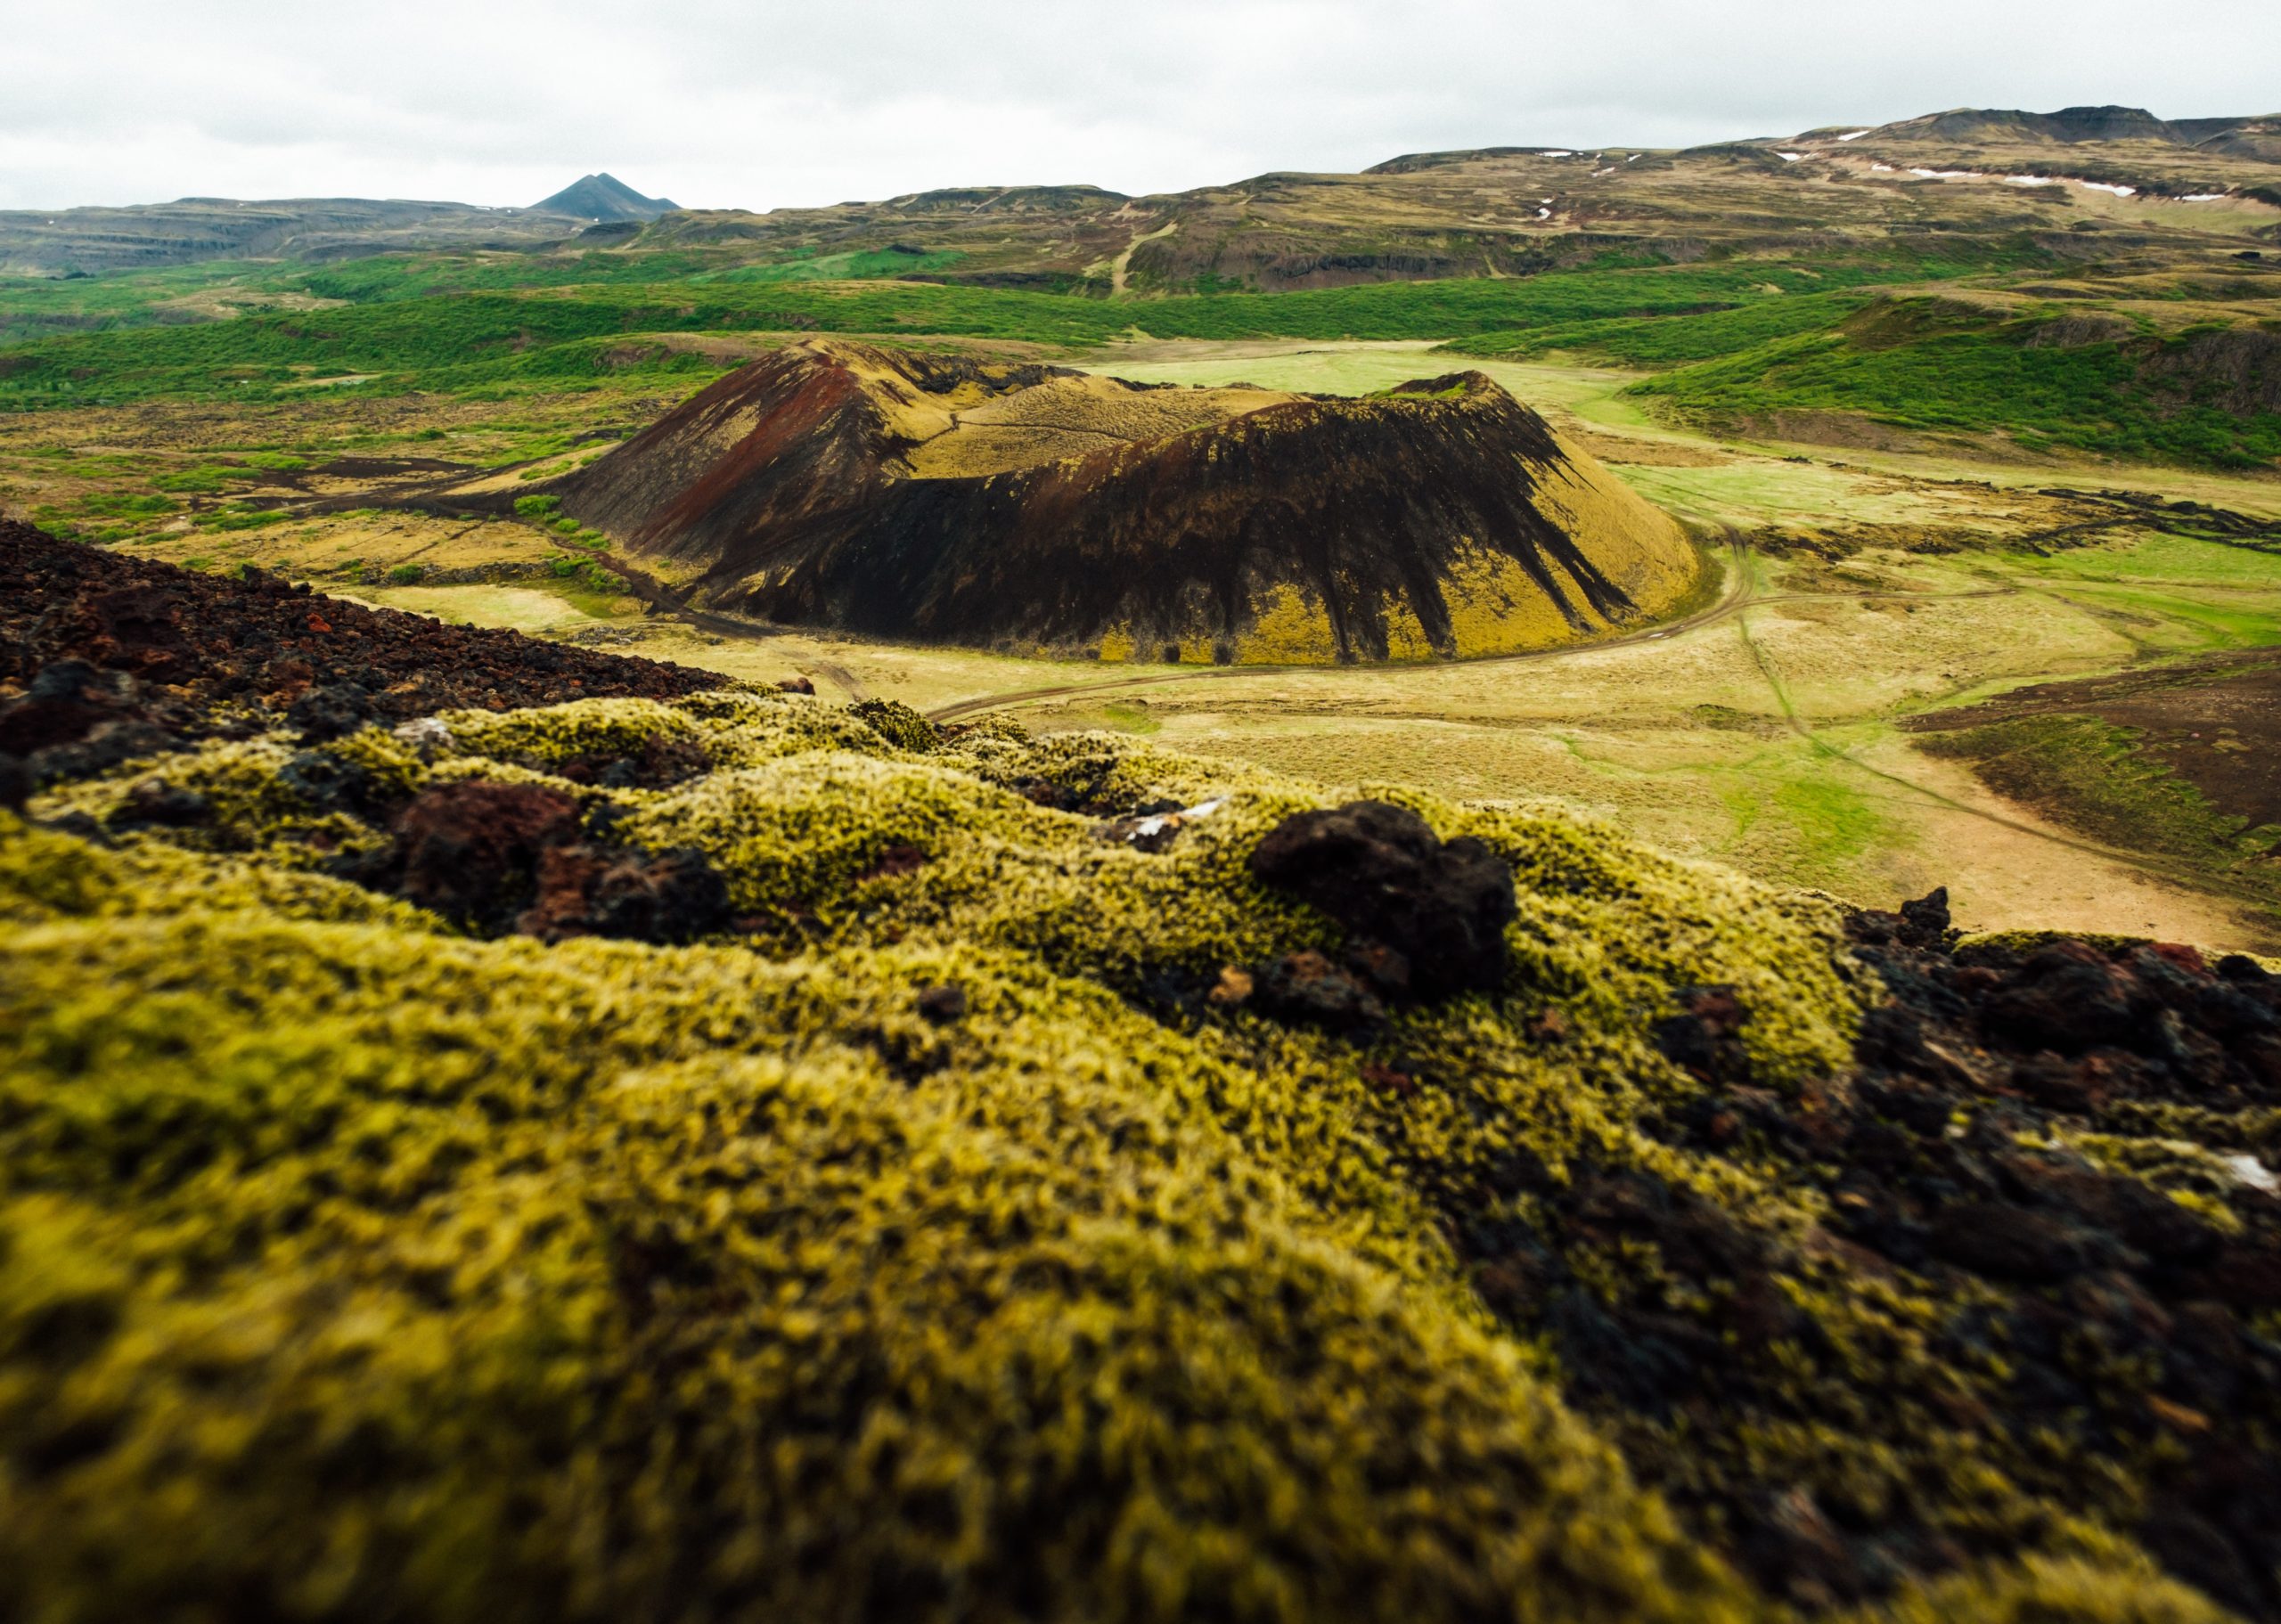 A crater somewhere in the Iceland